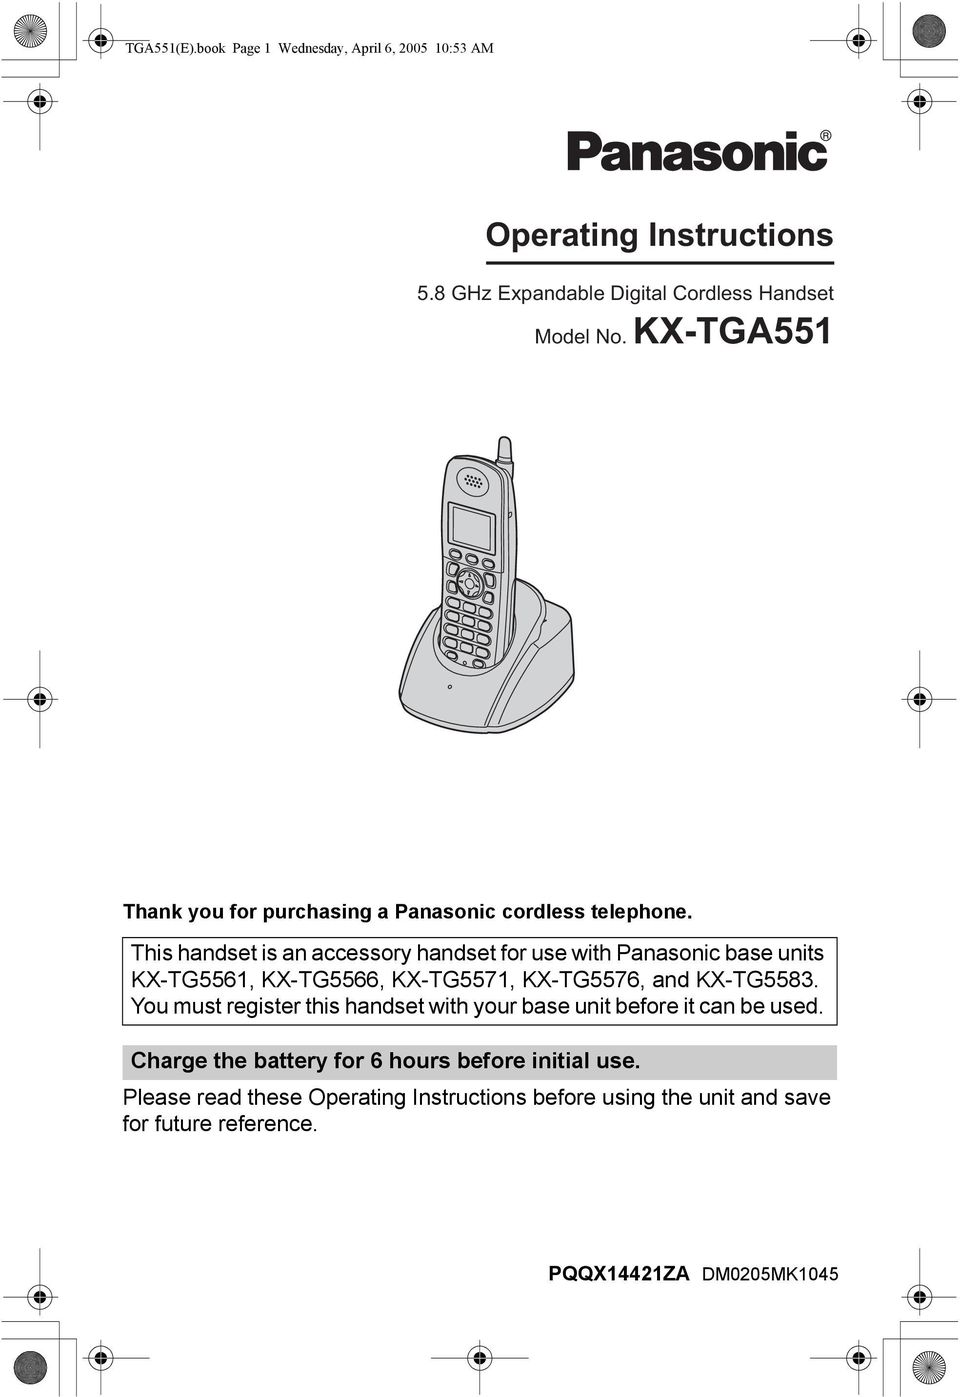 This handset is an accessory handset for use with Panasonic base units KX-TG5561, KX-TG5566, KX-TG5571, KX-TG5576, and KX-TG5583.